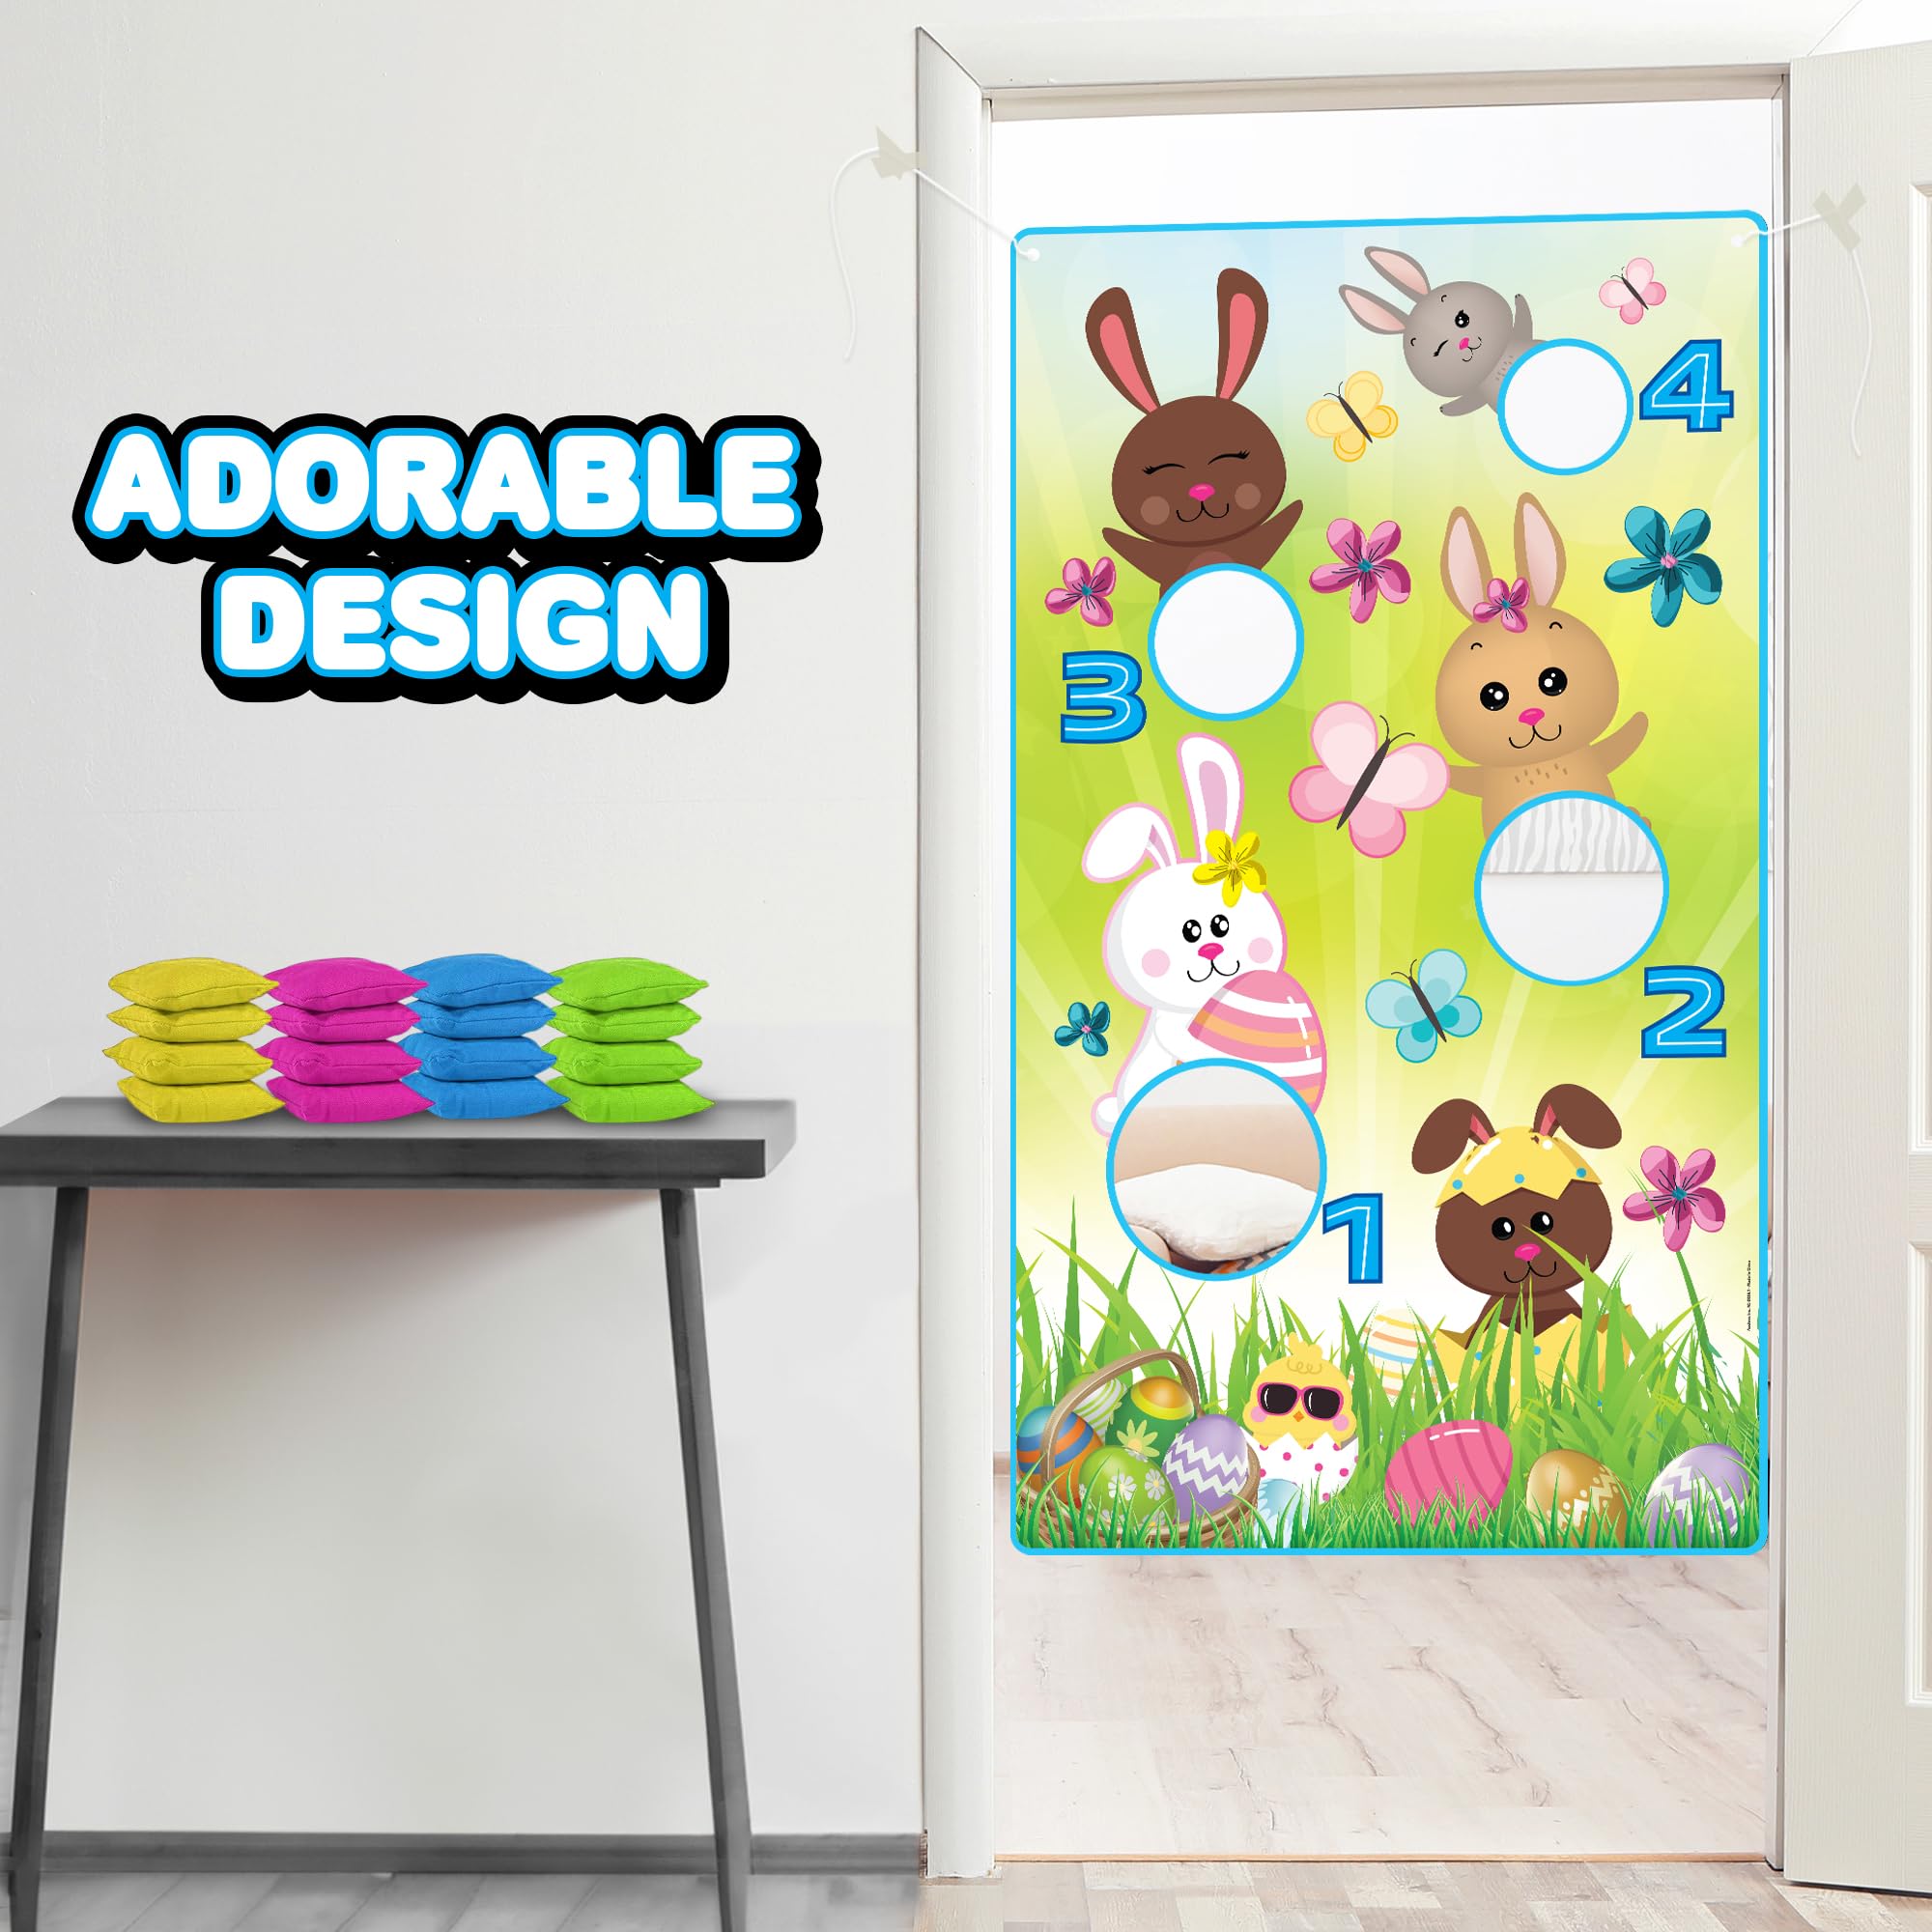 Easter Bean Bag Toss Game - Complete Set with Large Easter Banner, 12 Bean Bags, and Hanging String - Ages 3 Plus